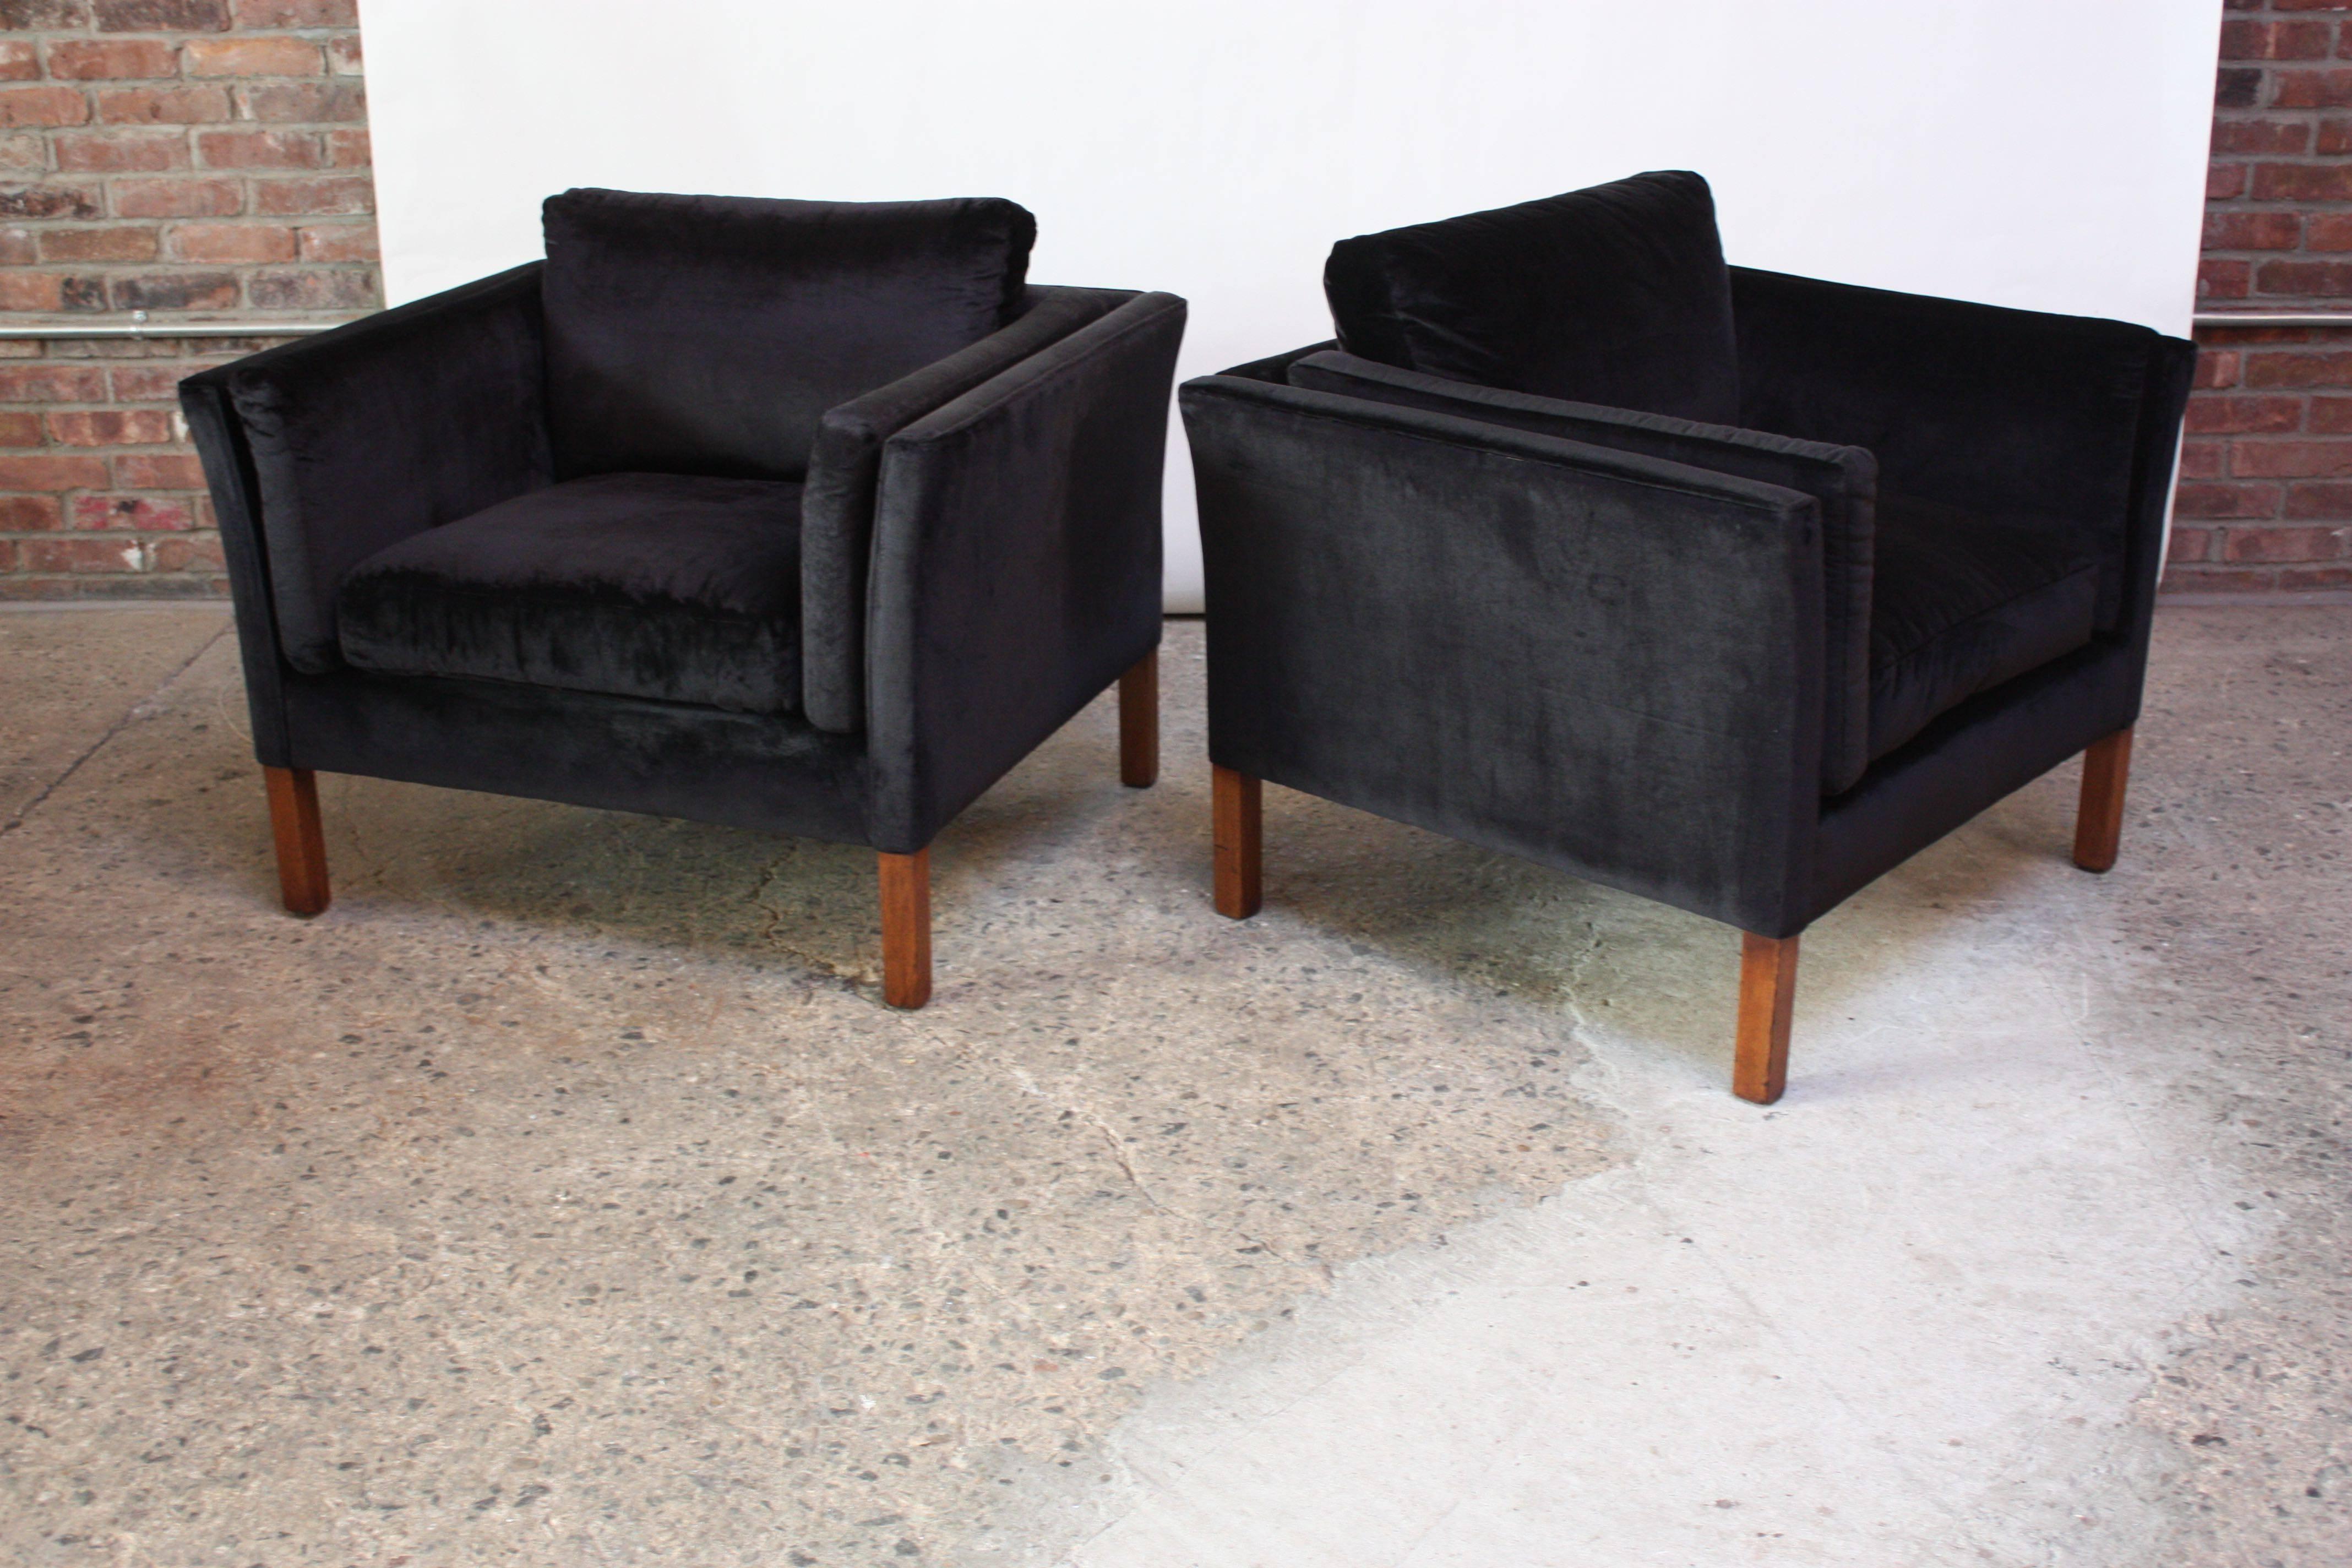 Plush pair of 1970s Danish modern lounge chairs by Mogens Hansen in black velvet with stained beech wood feet. Additional velvet cushions (one on each side) nestle into the curvature of the frames for added comfort / support. Velvet and foam are